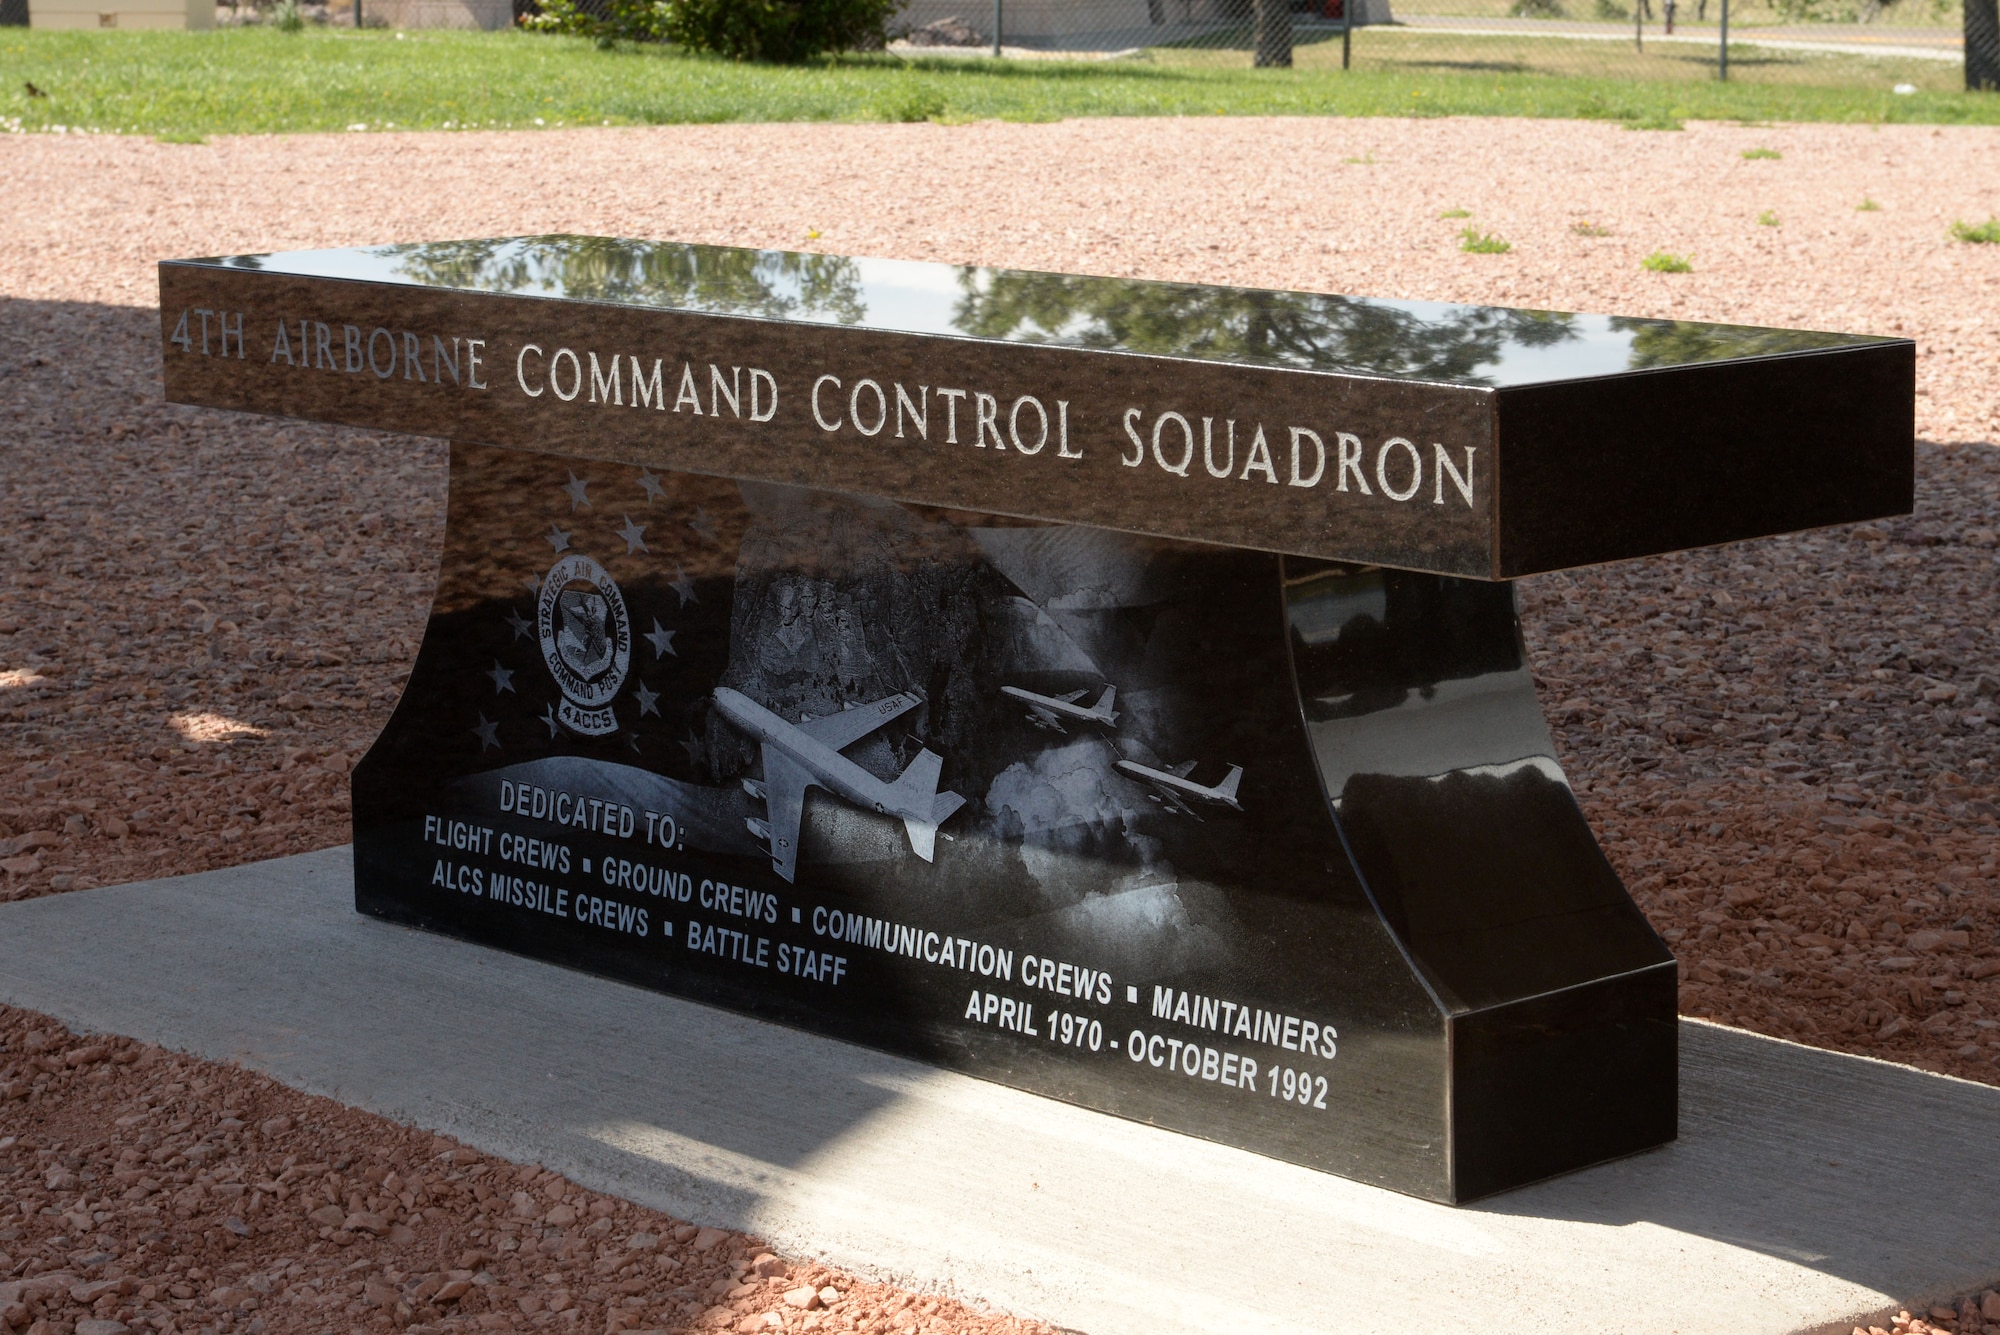 The 4th Airborne Command Control Squadron memorial bench sits on the grounds at the South Dakota Air and Space Museum, Box Elder, S.D., June 24, 2017. The memorial includes an American flag flying in the background with an image of an EC-135 aircraft flying over Mount Rushmore at the center; an image of two EC-135s conducting in-flight refueling to the right; and the squadron patch on the left. (U.S. Air Force photo by Staff Sgt. Hailey Staker)